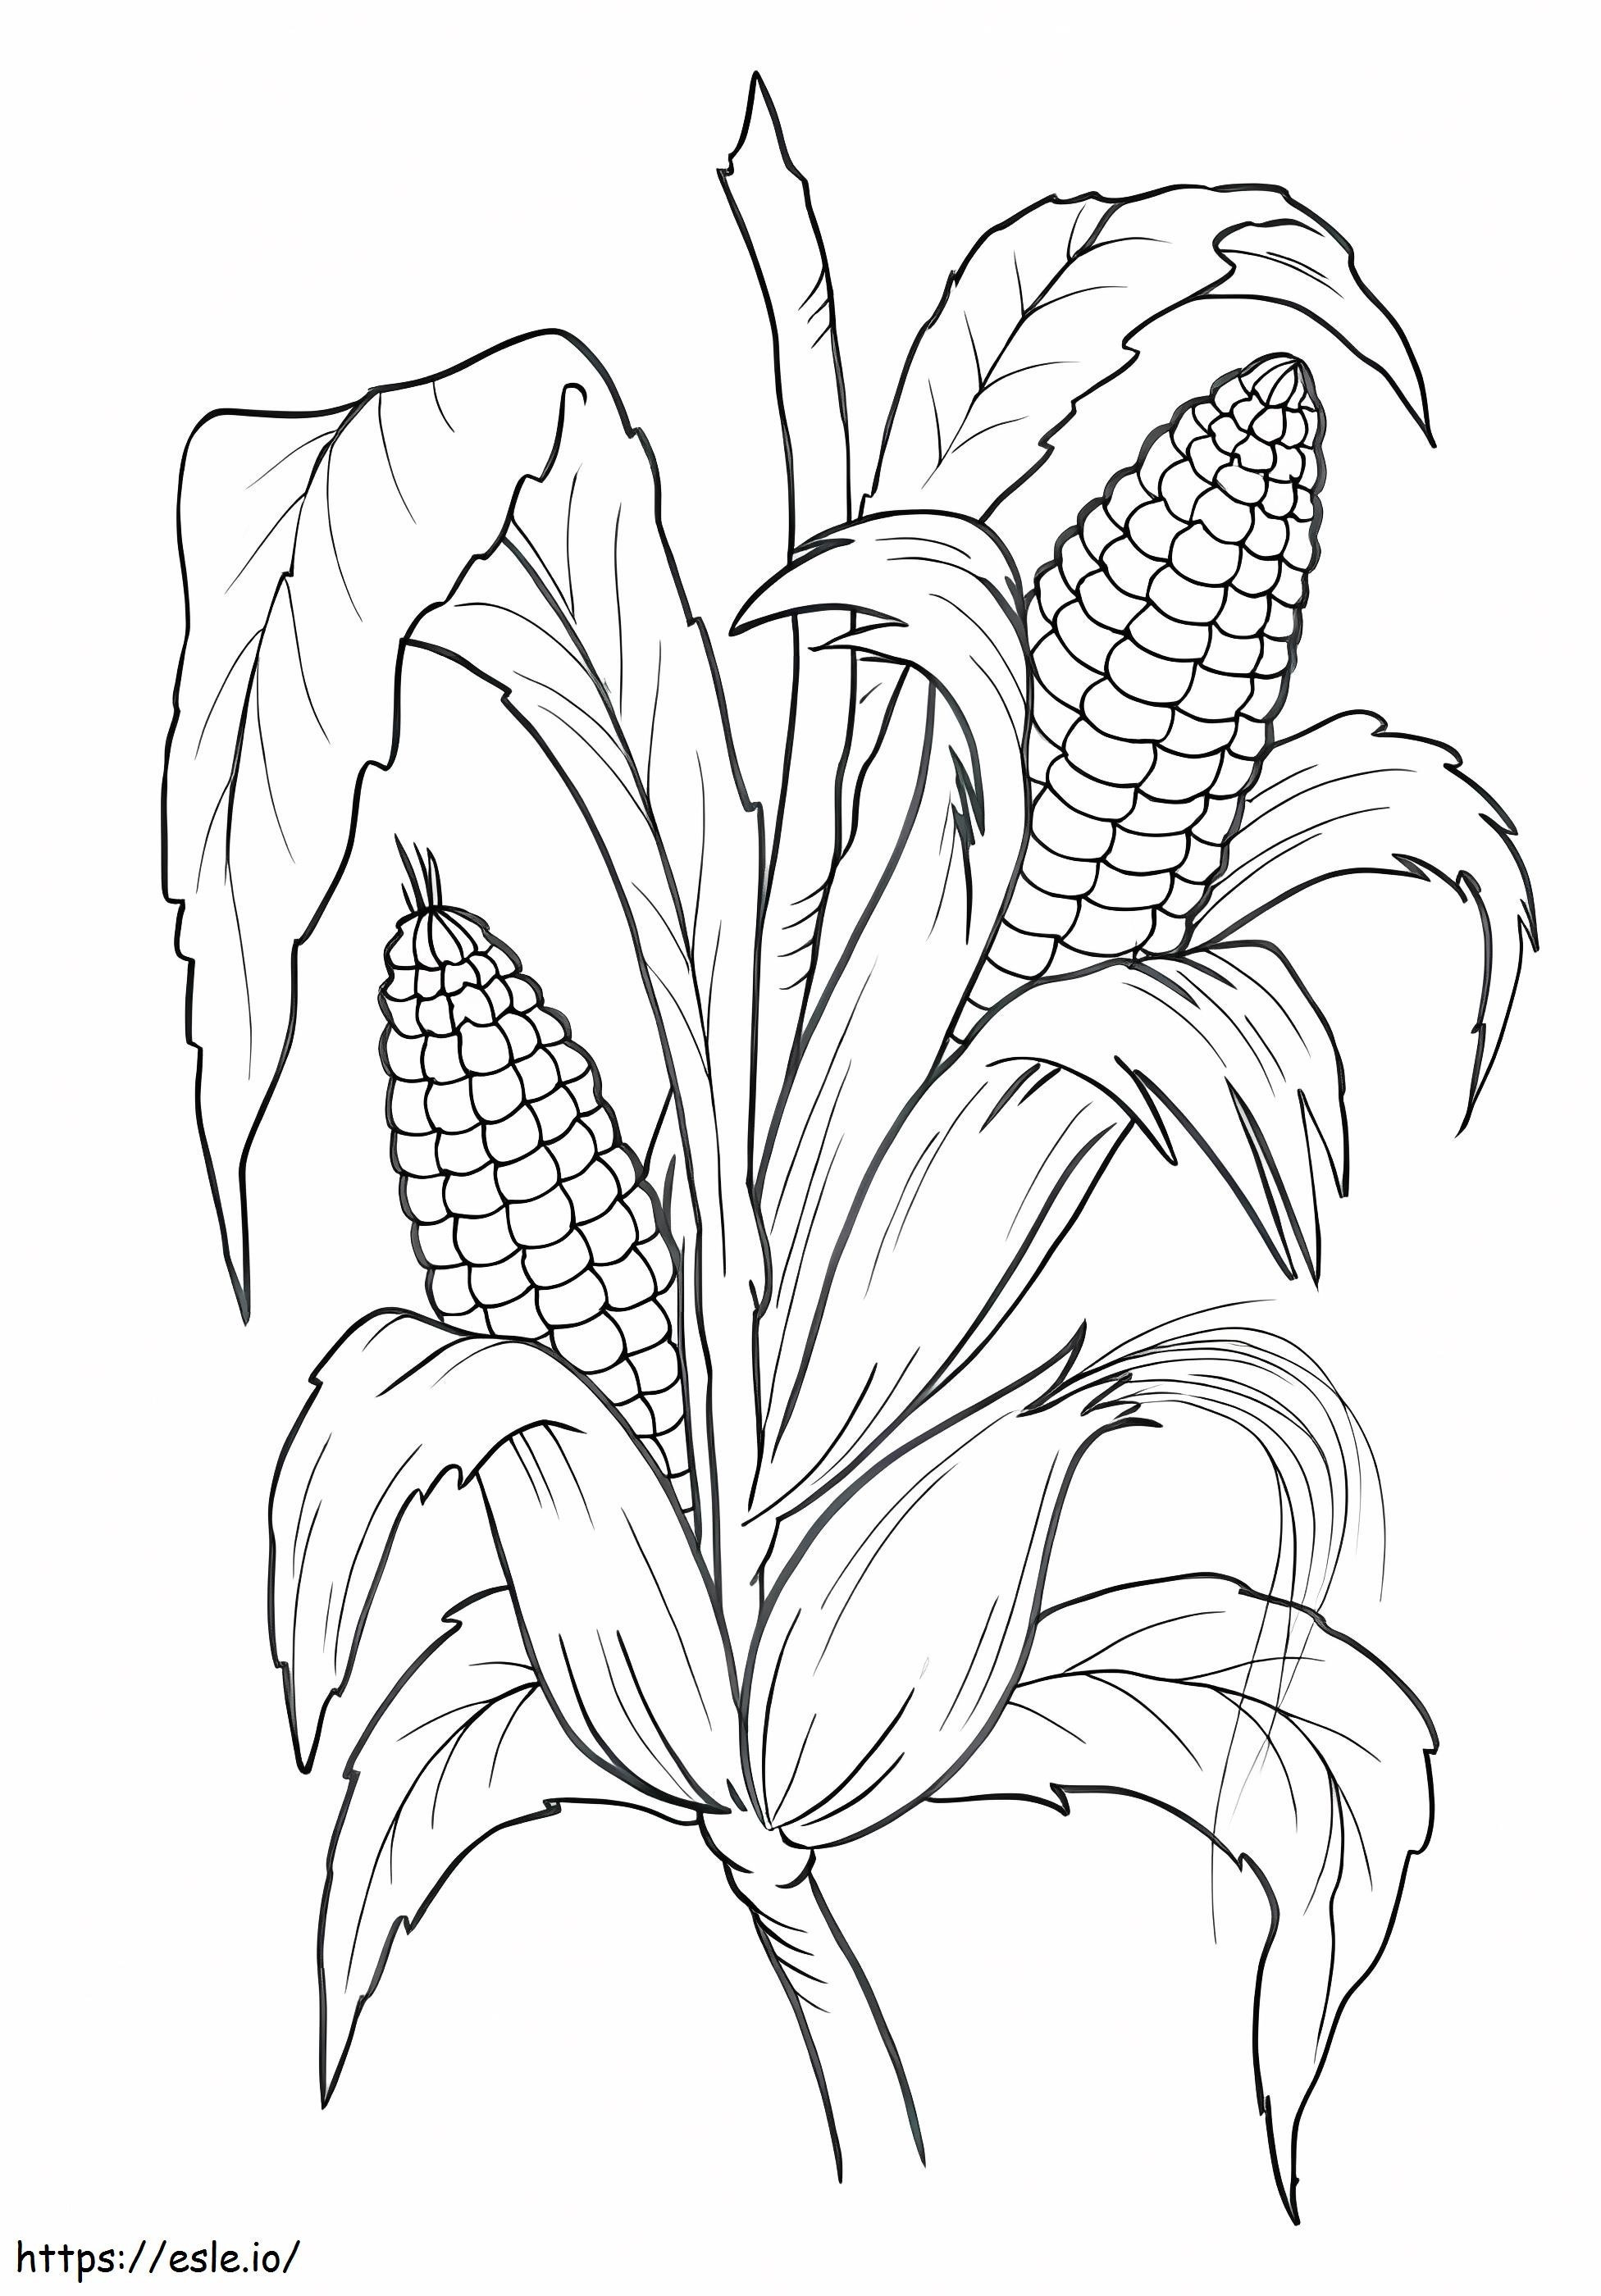 Two Ears Of Corn On The Branch Of A Tree To Color coloring page